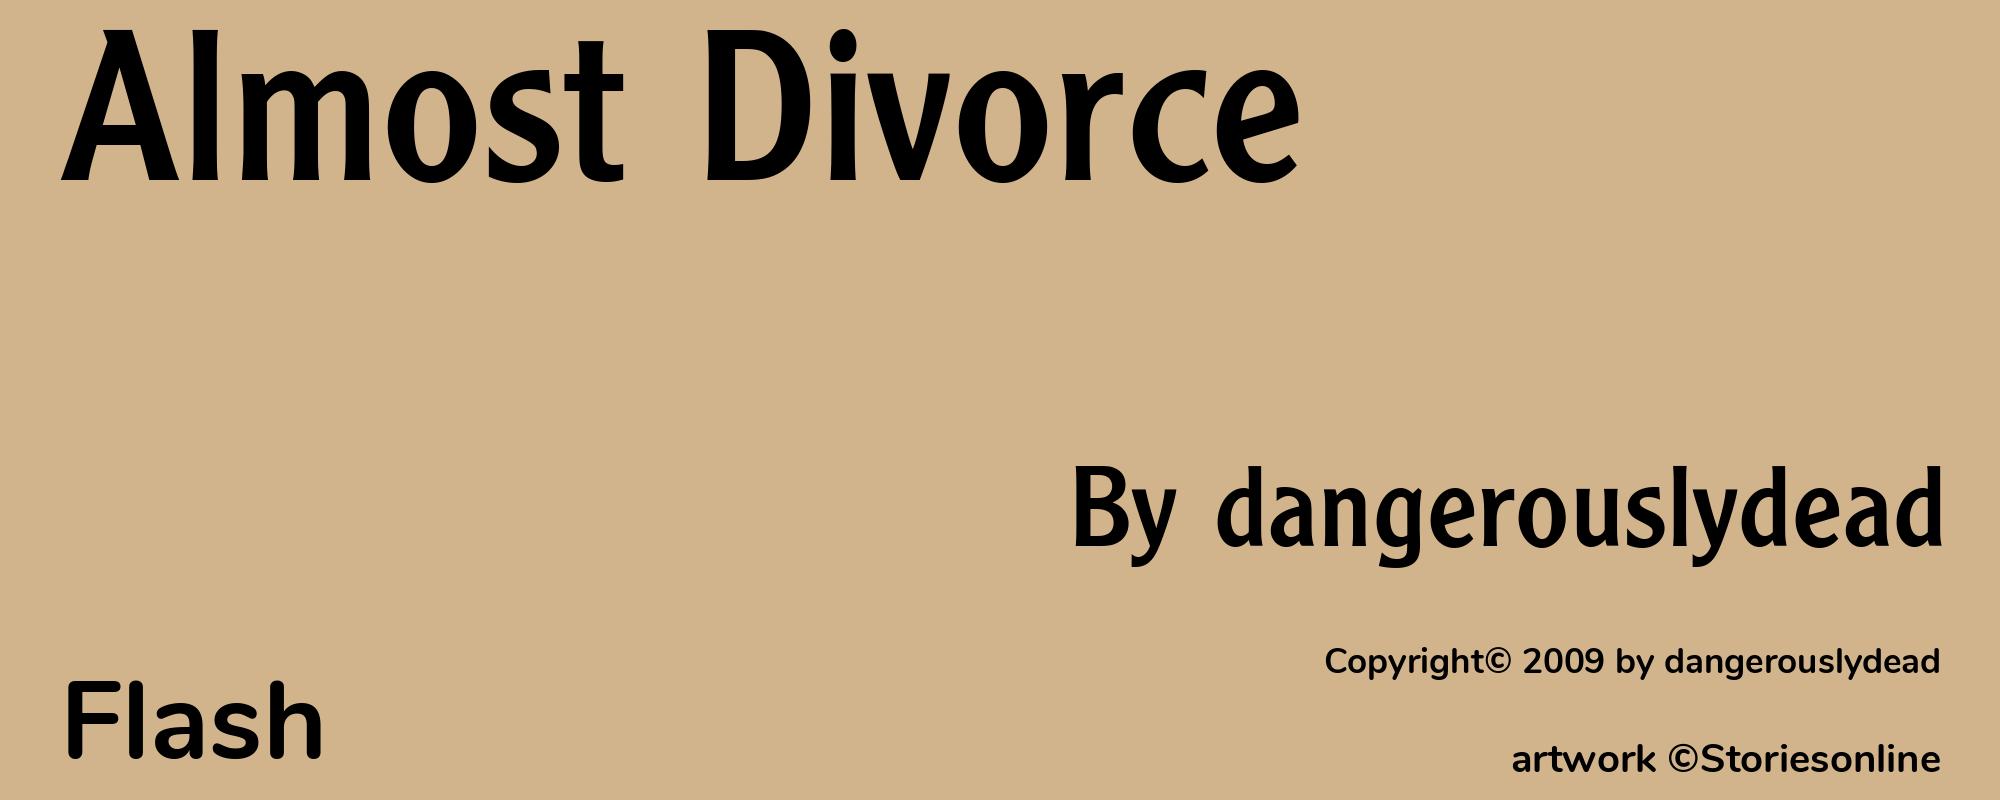 Almost Divorce - Cover